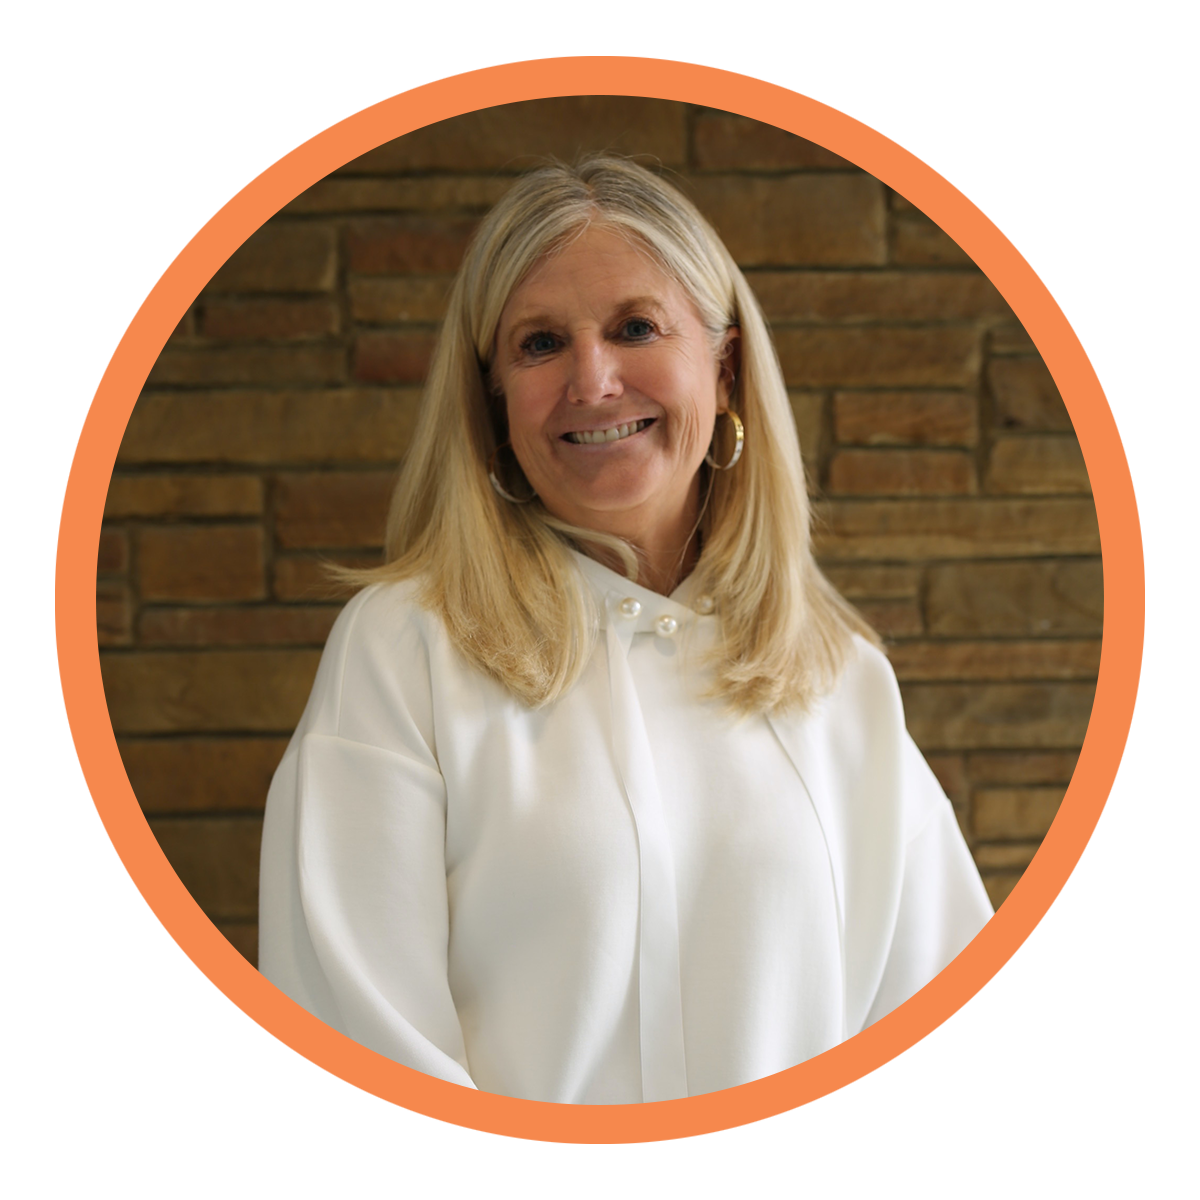  Robin Bagwell serves on the Dallas Doing Good board of directors and is a guest contributor. She is a community leader, serving on many nonprofit boards, and chairing numerous fundraisers.     